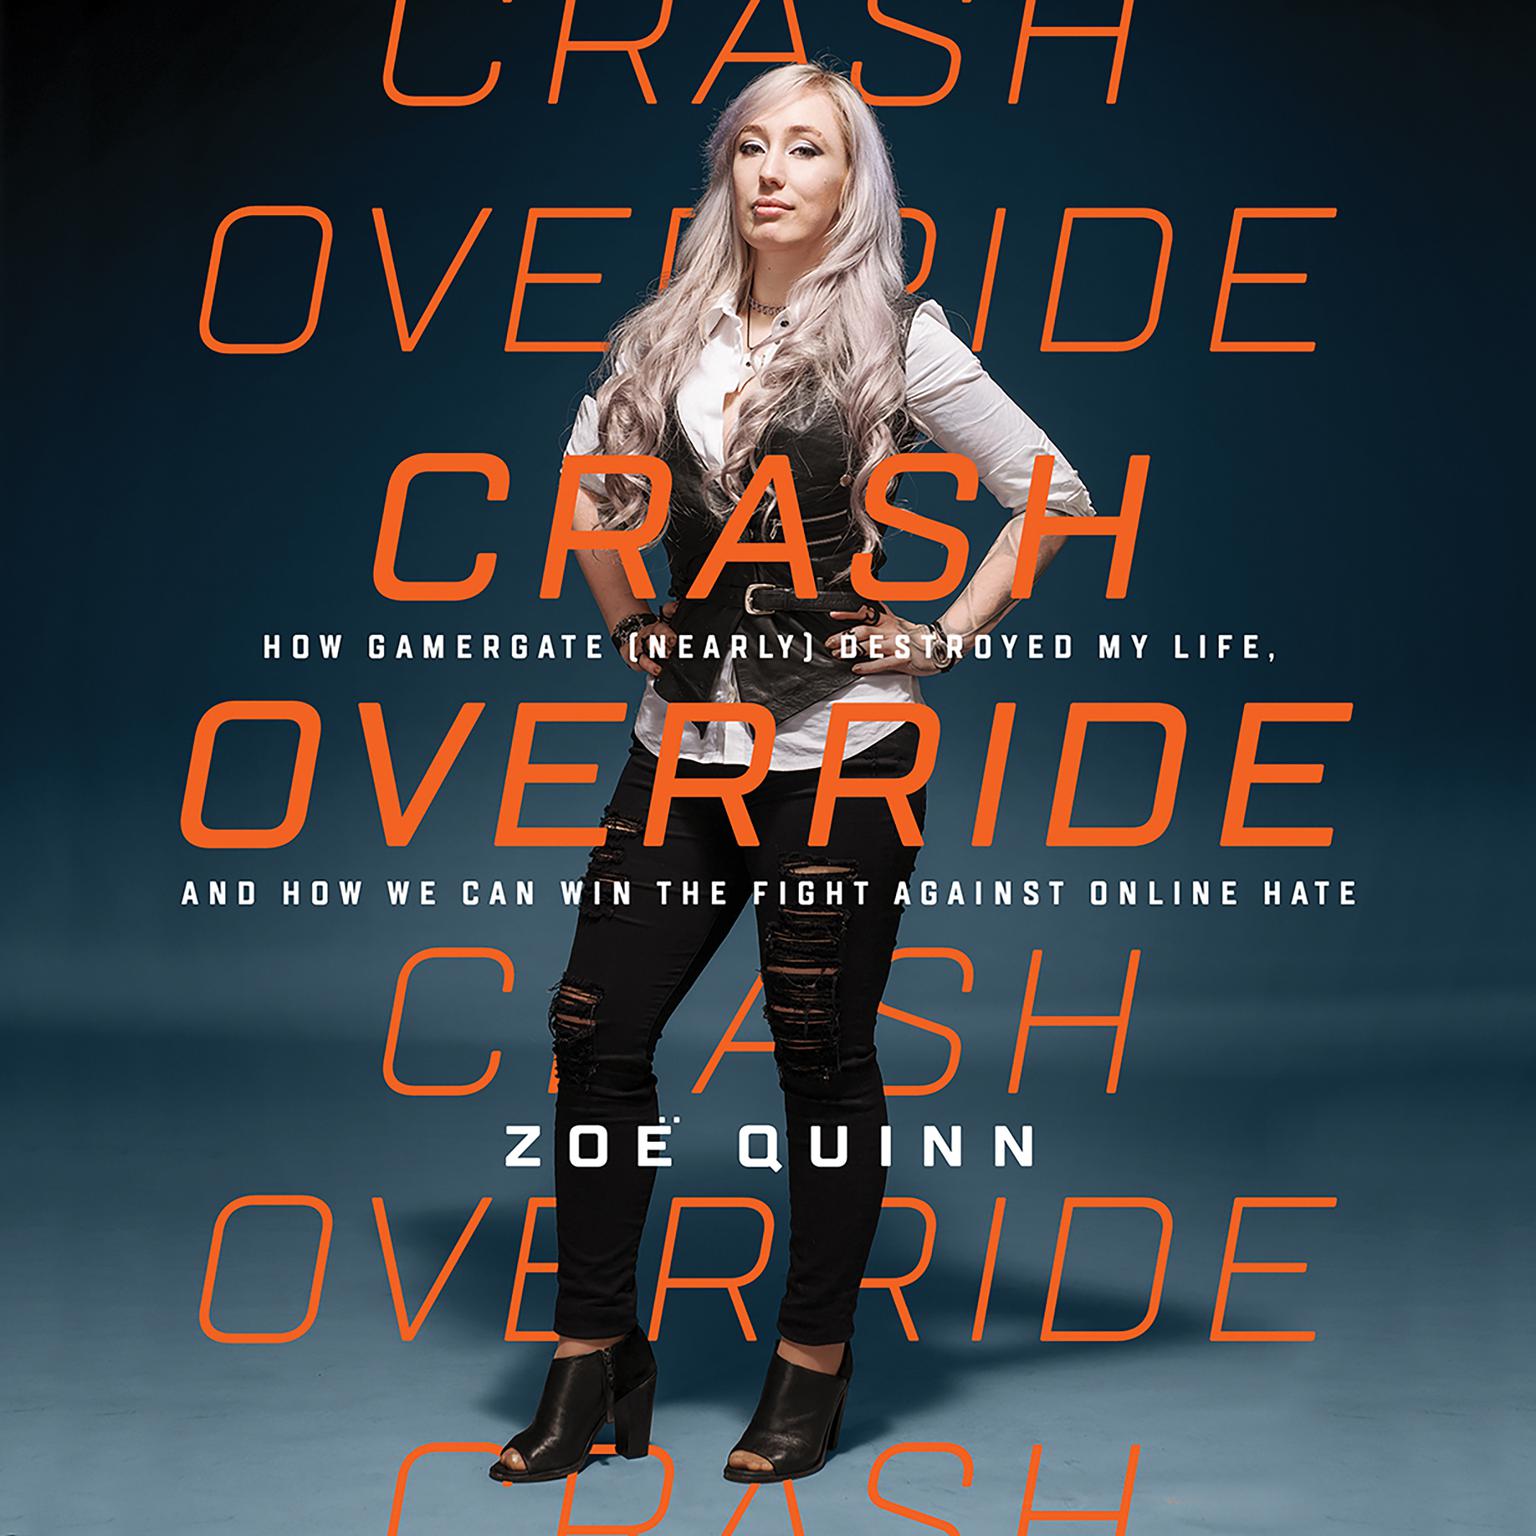 Crash Override: How Gamergate (Nearly) Destroyed My Life, and How We Can Win the Fight Against Online Hate Audiobook, by Zoë Quinn